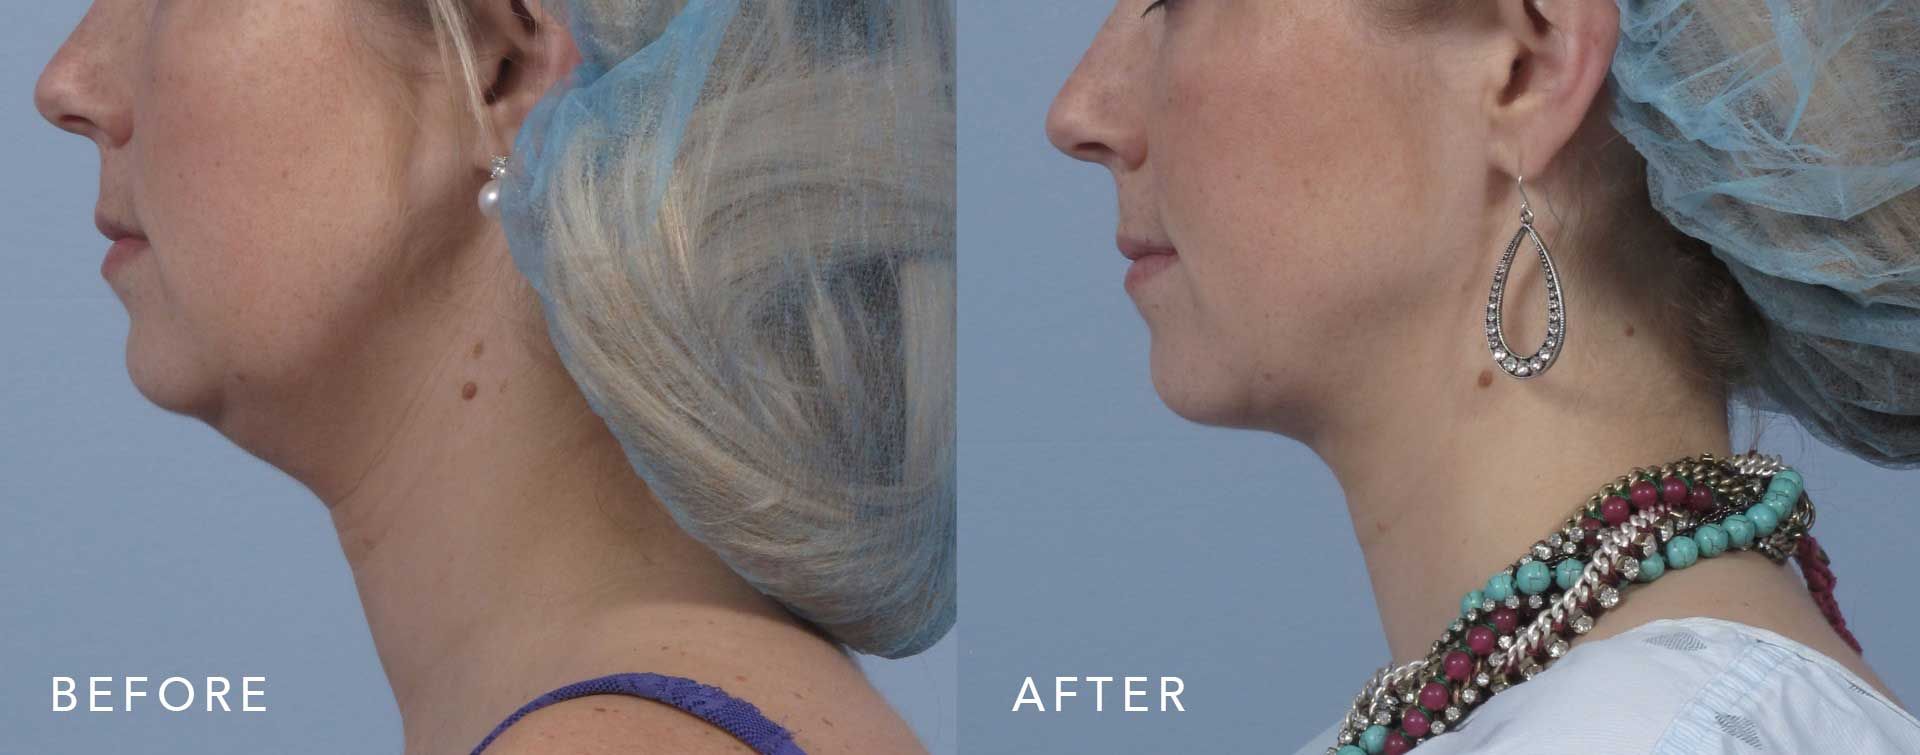 Before and After Scarless Neck Lift treatment #2